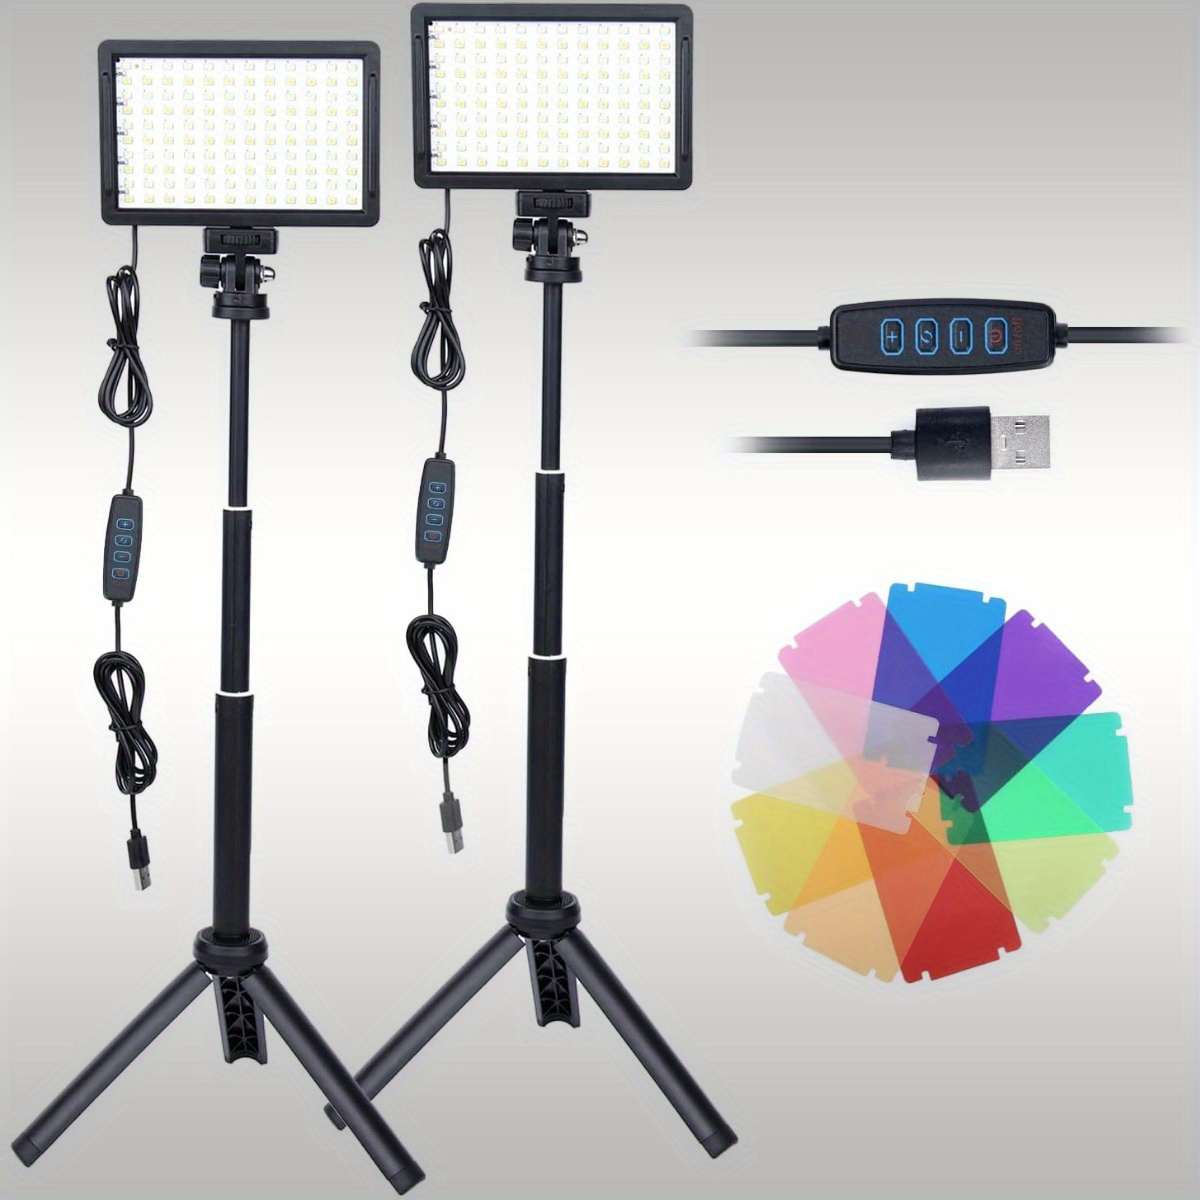 LED Video Light Kit, 3 Colors Dimmable, 2500K-9000K USB LED Video  Conference Lighting with Adjustable Tripod Stand, Adjustable Clips for  , Live Streaming, Lighting, Meetings, Gaming, Streaming - KENTFAITH